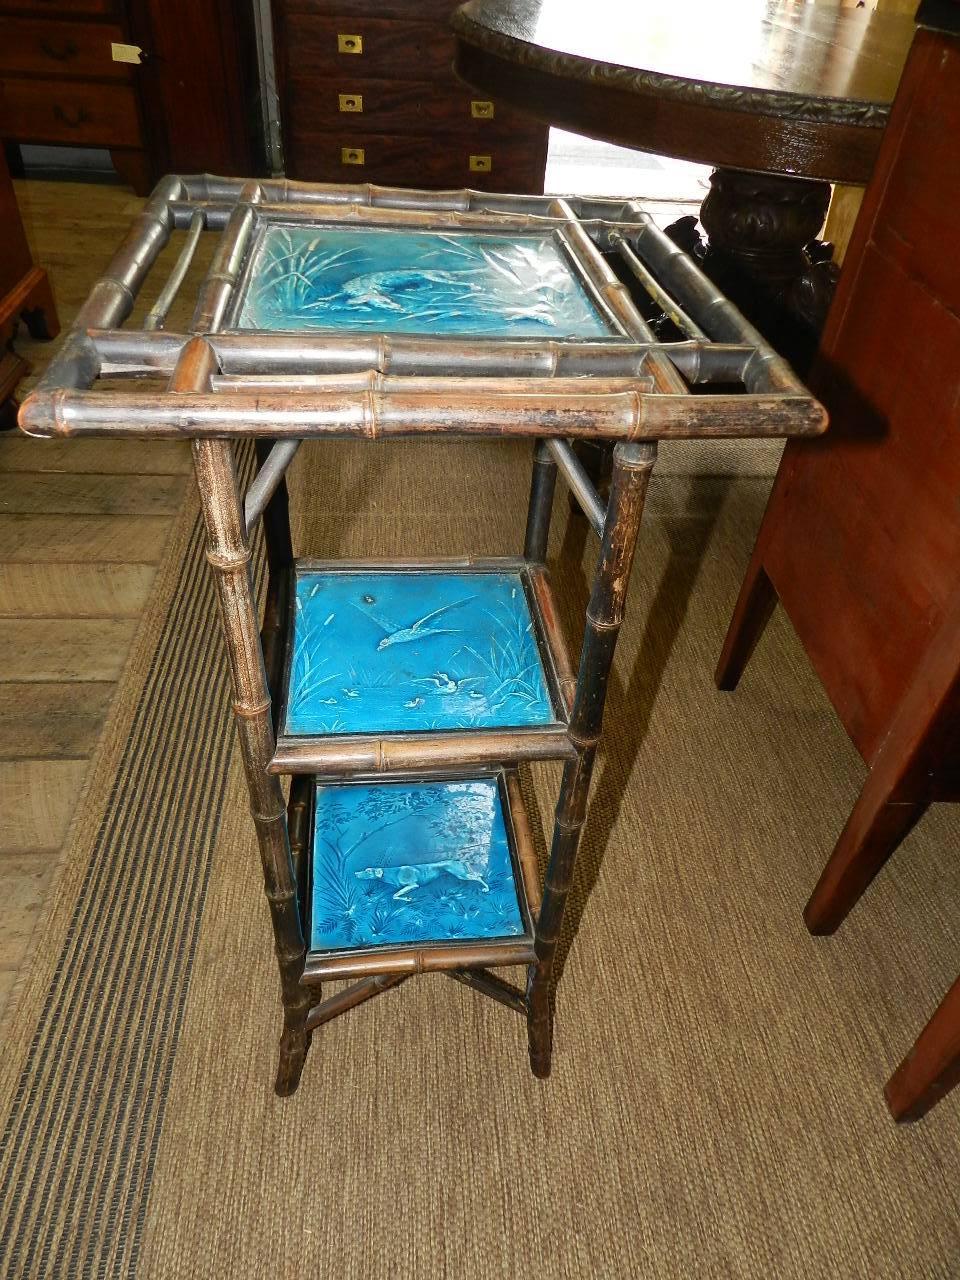 Antique bamboo stand with 3 original Minton tiles (ca 1880) depicting dogs and birds